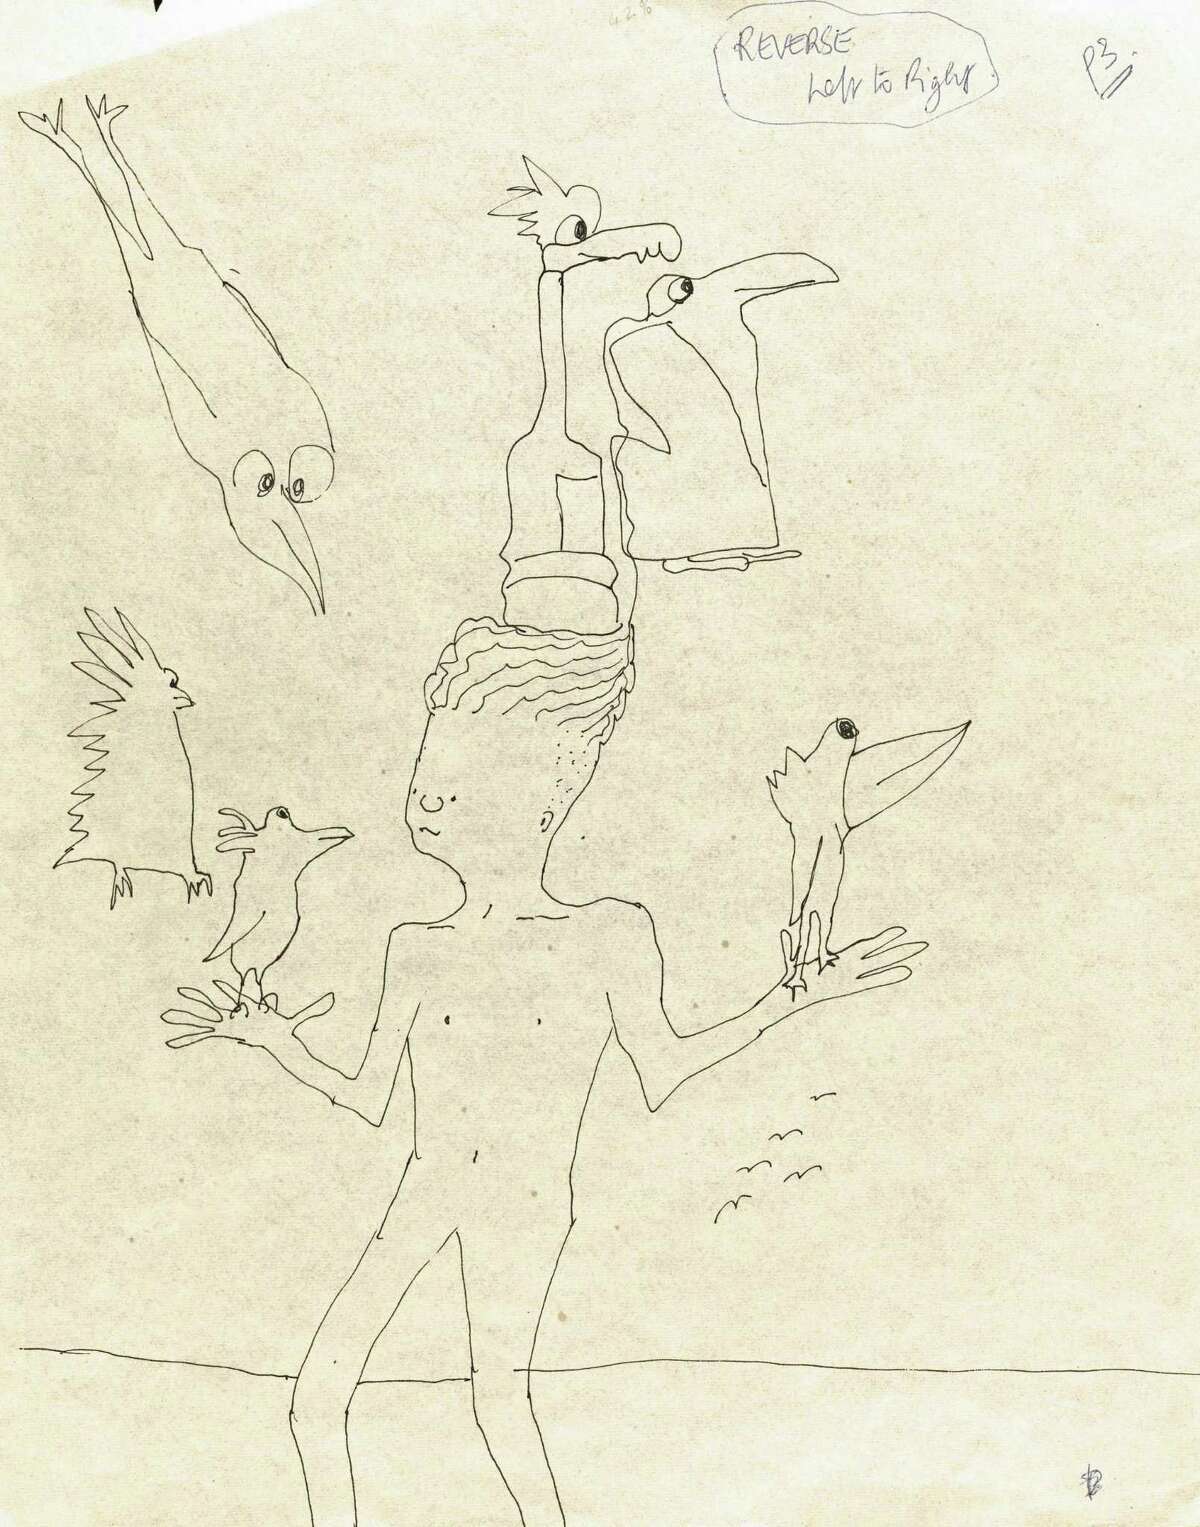 This undated photo provided by Sothebyís shows an untitled ink drawing by John Lennon of a boy and six birds. The drawing is part of an 89-piece collection of Lennonís original whimsical drawings, poems and prose for his books ìIn His Own Writeî and ìA Spaniard in the Worksî that will be auctioned by Sotheby's in New York on Wednesday, June 4, 2014. (AP Photo/Sotheby's, John Lennon)